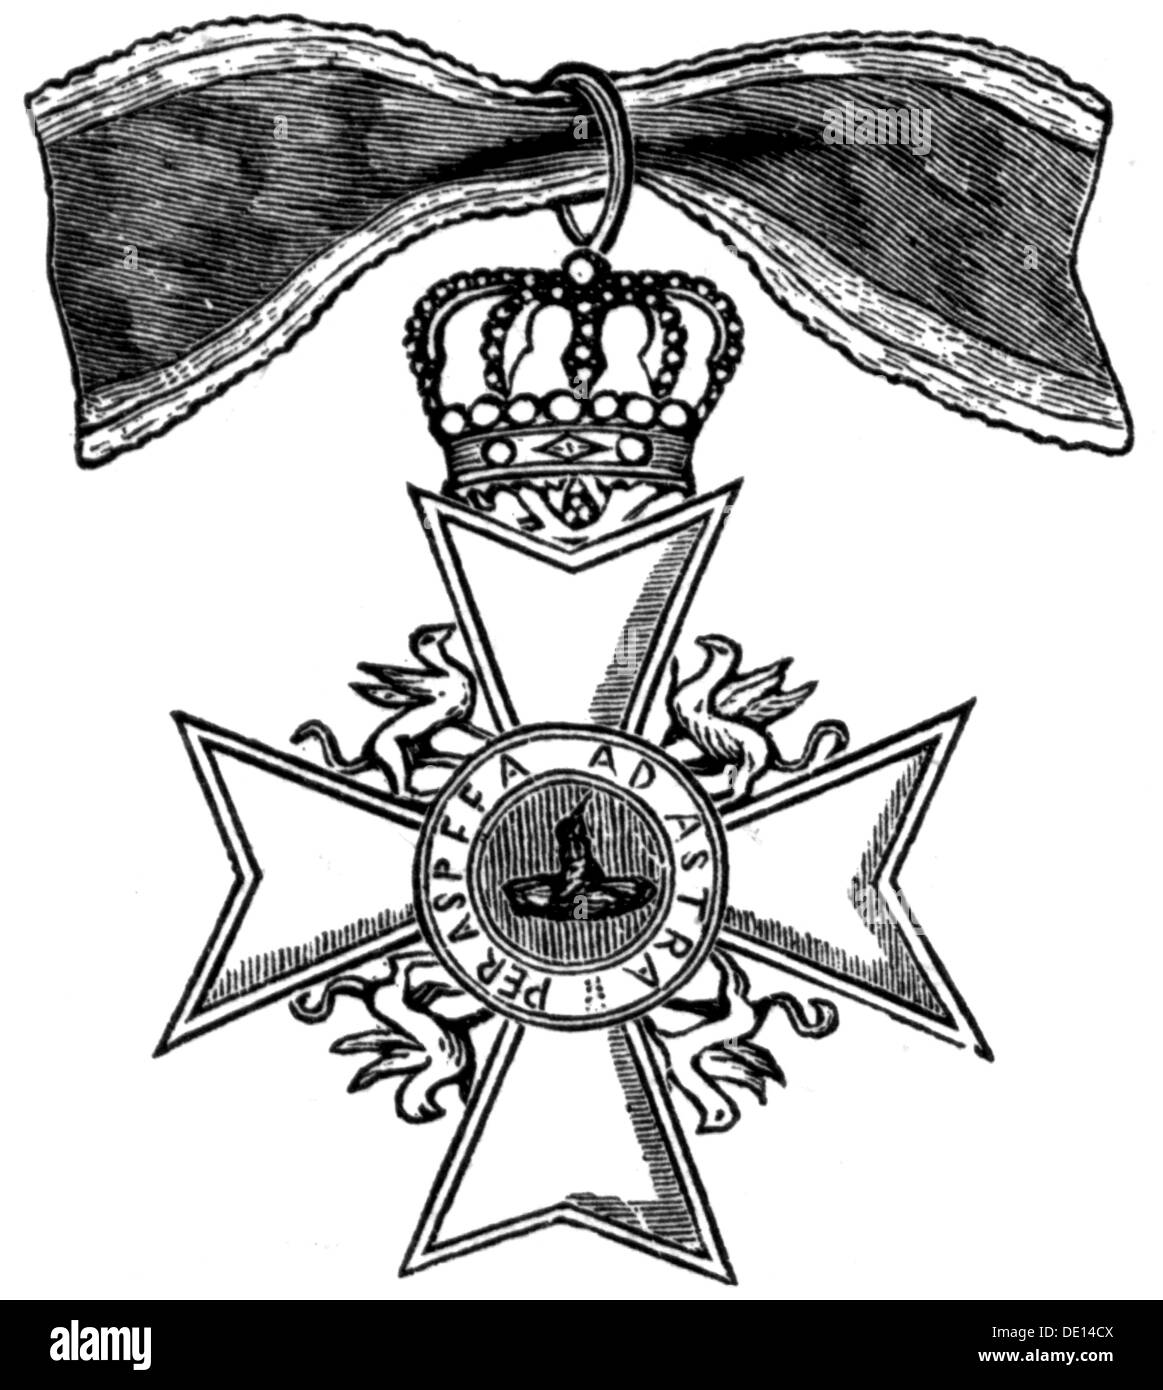 medals and decorations, Germany, Mecklenburg, House Order of the Wendish Crown, founded 12.5.1864 by Grand Duke Frederick Francis II of Mecklenburg-Schwerin and Grand Duke Frederick William of Mecklenburg-Strelitz, badge, wood engraving, 2nd half 19th century, orders of merit, Order of Merit, crosses, Maltese cross, Wendish crown, Grand Duchy of Mecklenburg - Schwerin, Grand Duchy of Mecklenburg - Strelitz, medal, decoration, medals, decorations, historic, historical, Additional-Rights-Clearences-Not Available Stock Photo